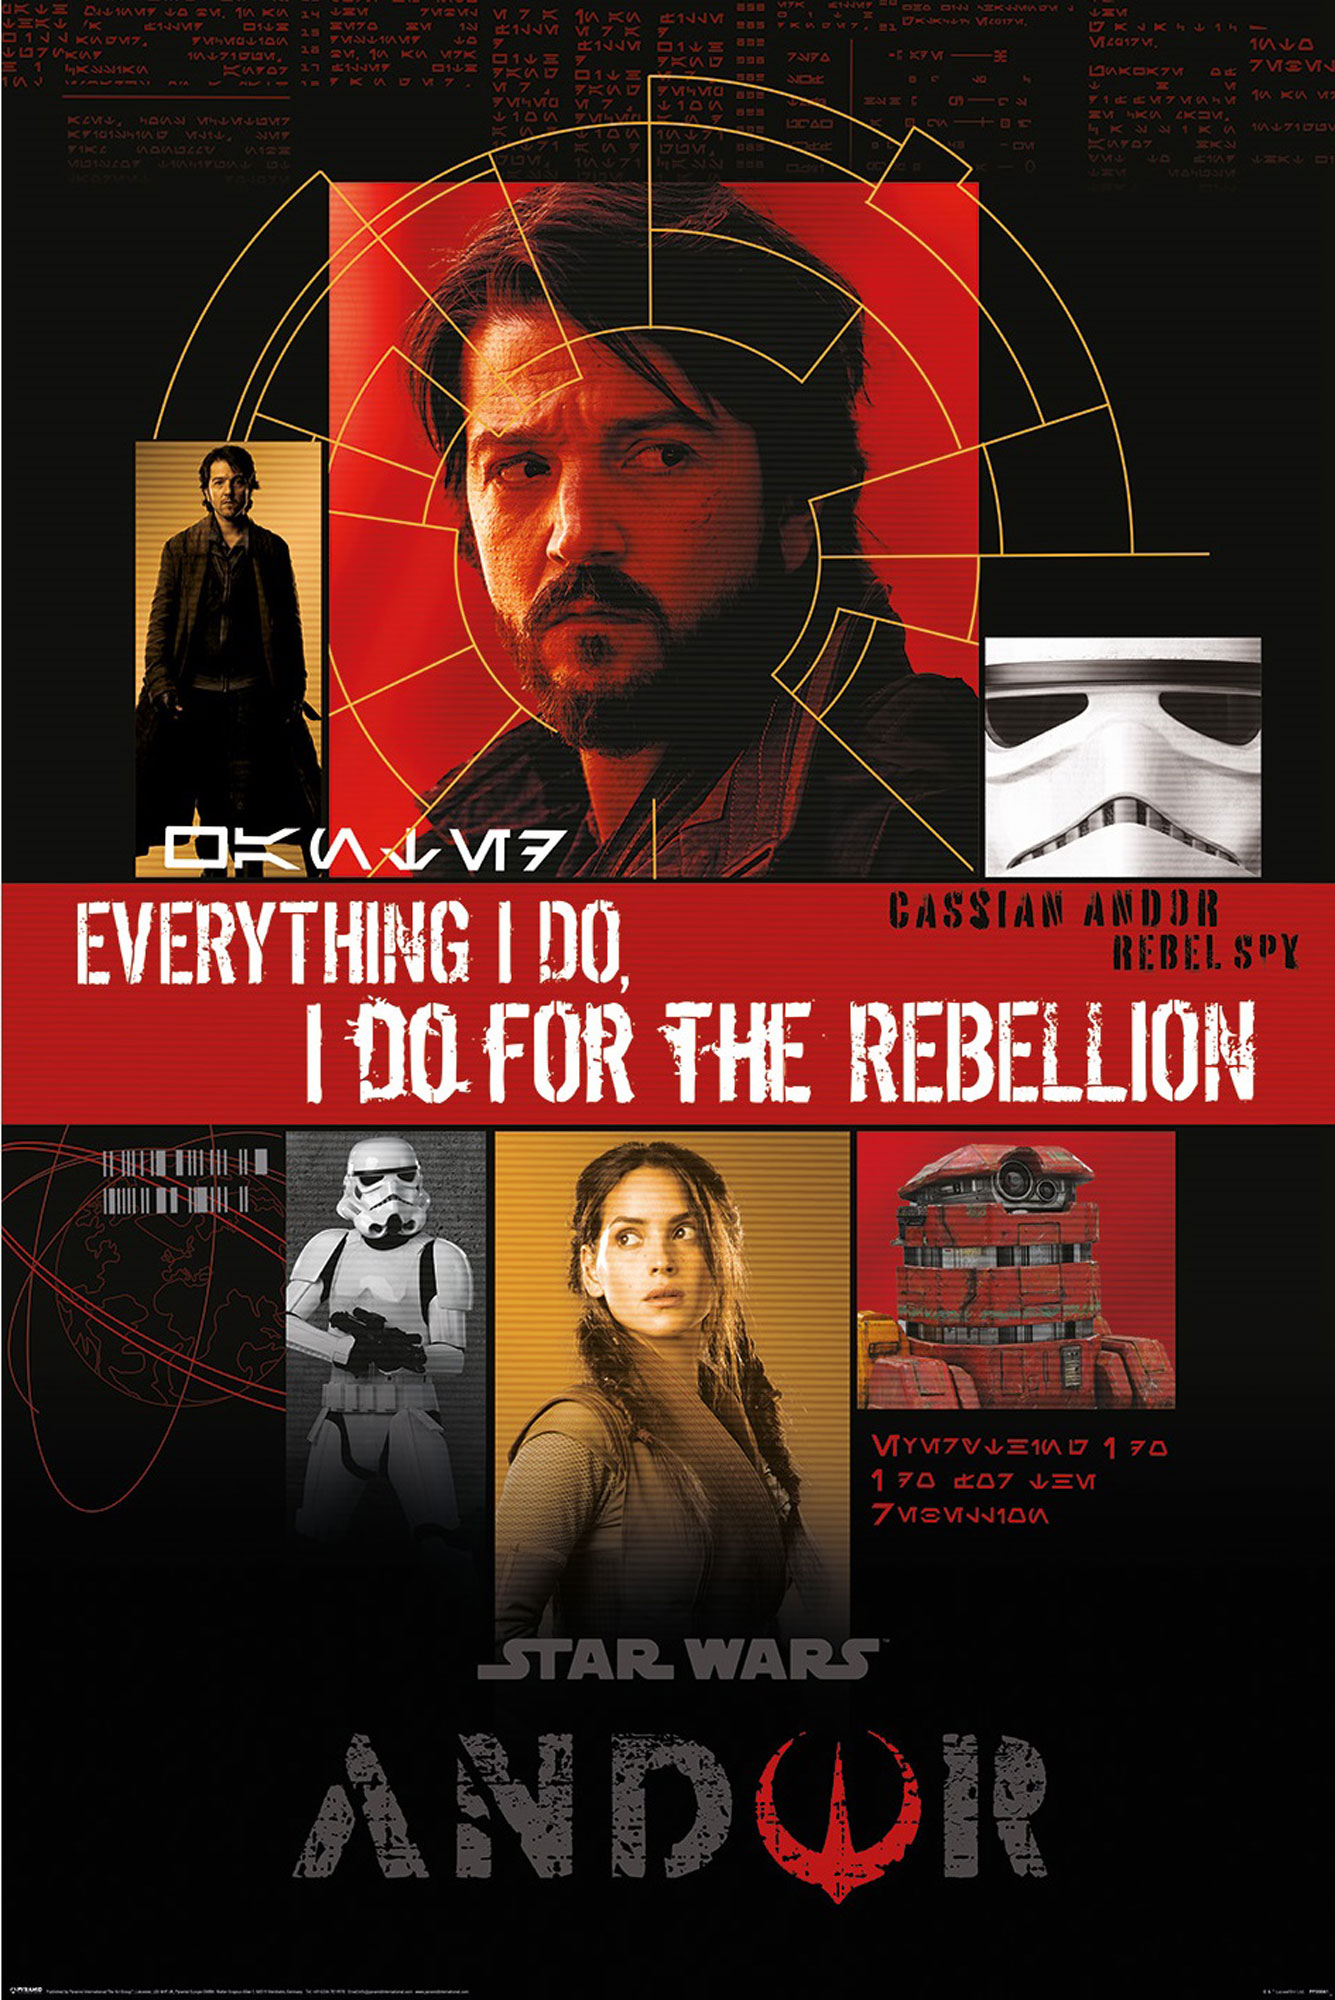 Star Wars - - Andor Rebellion For The